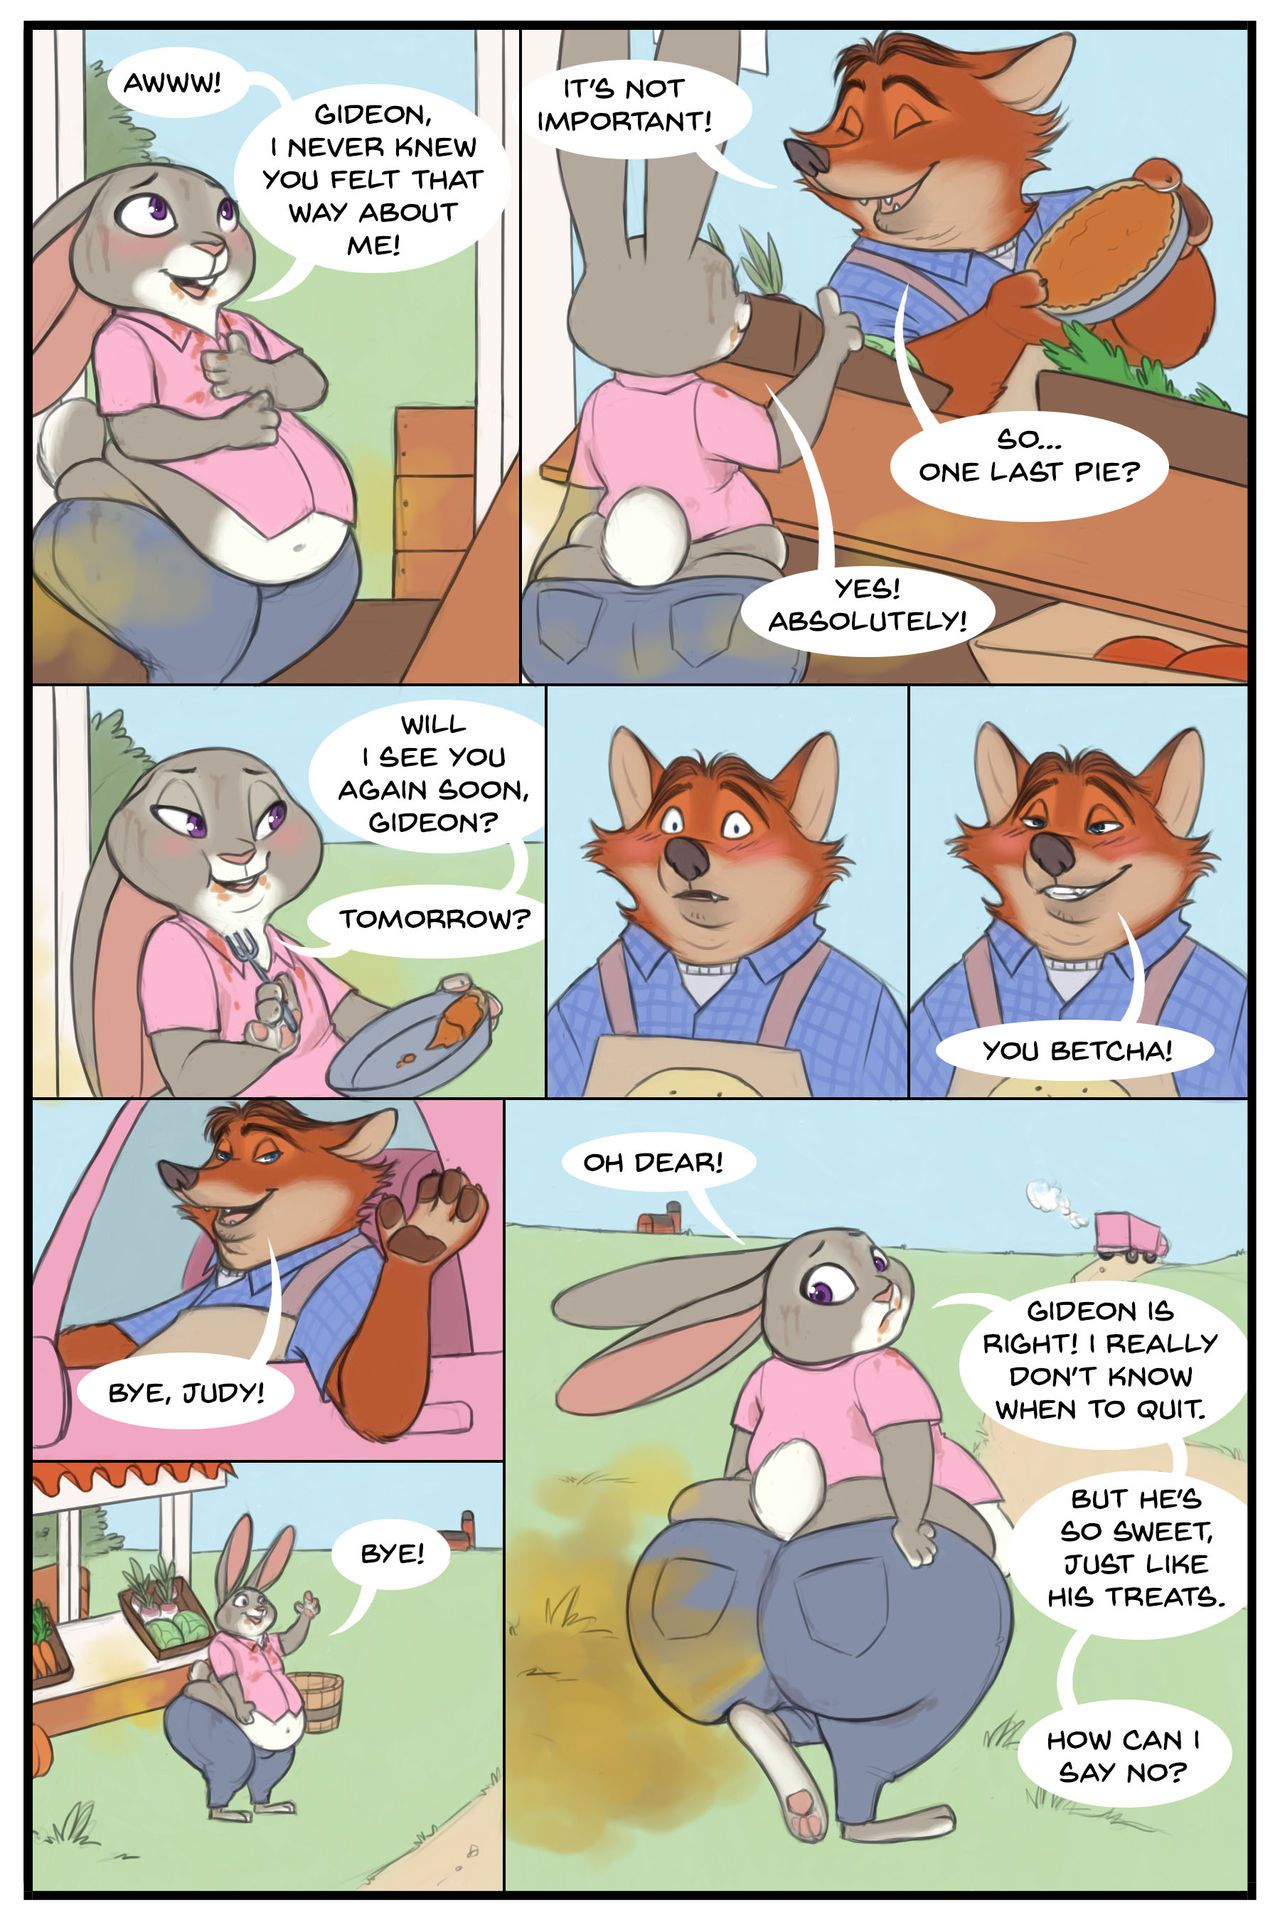 Don't Know When to Quit (Zootopia) 7